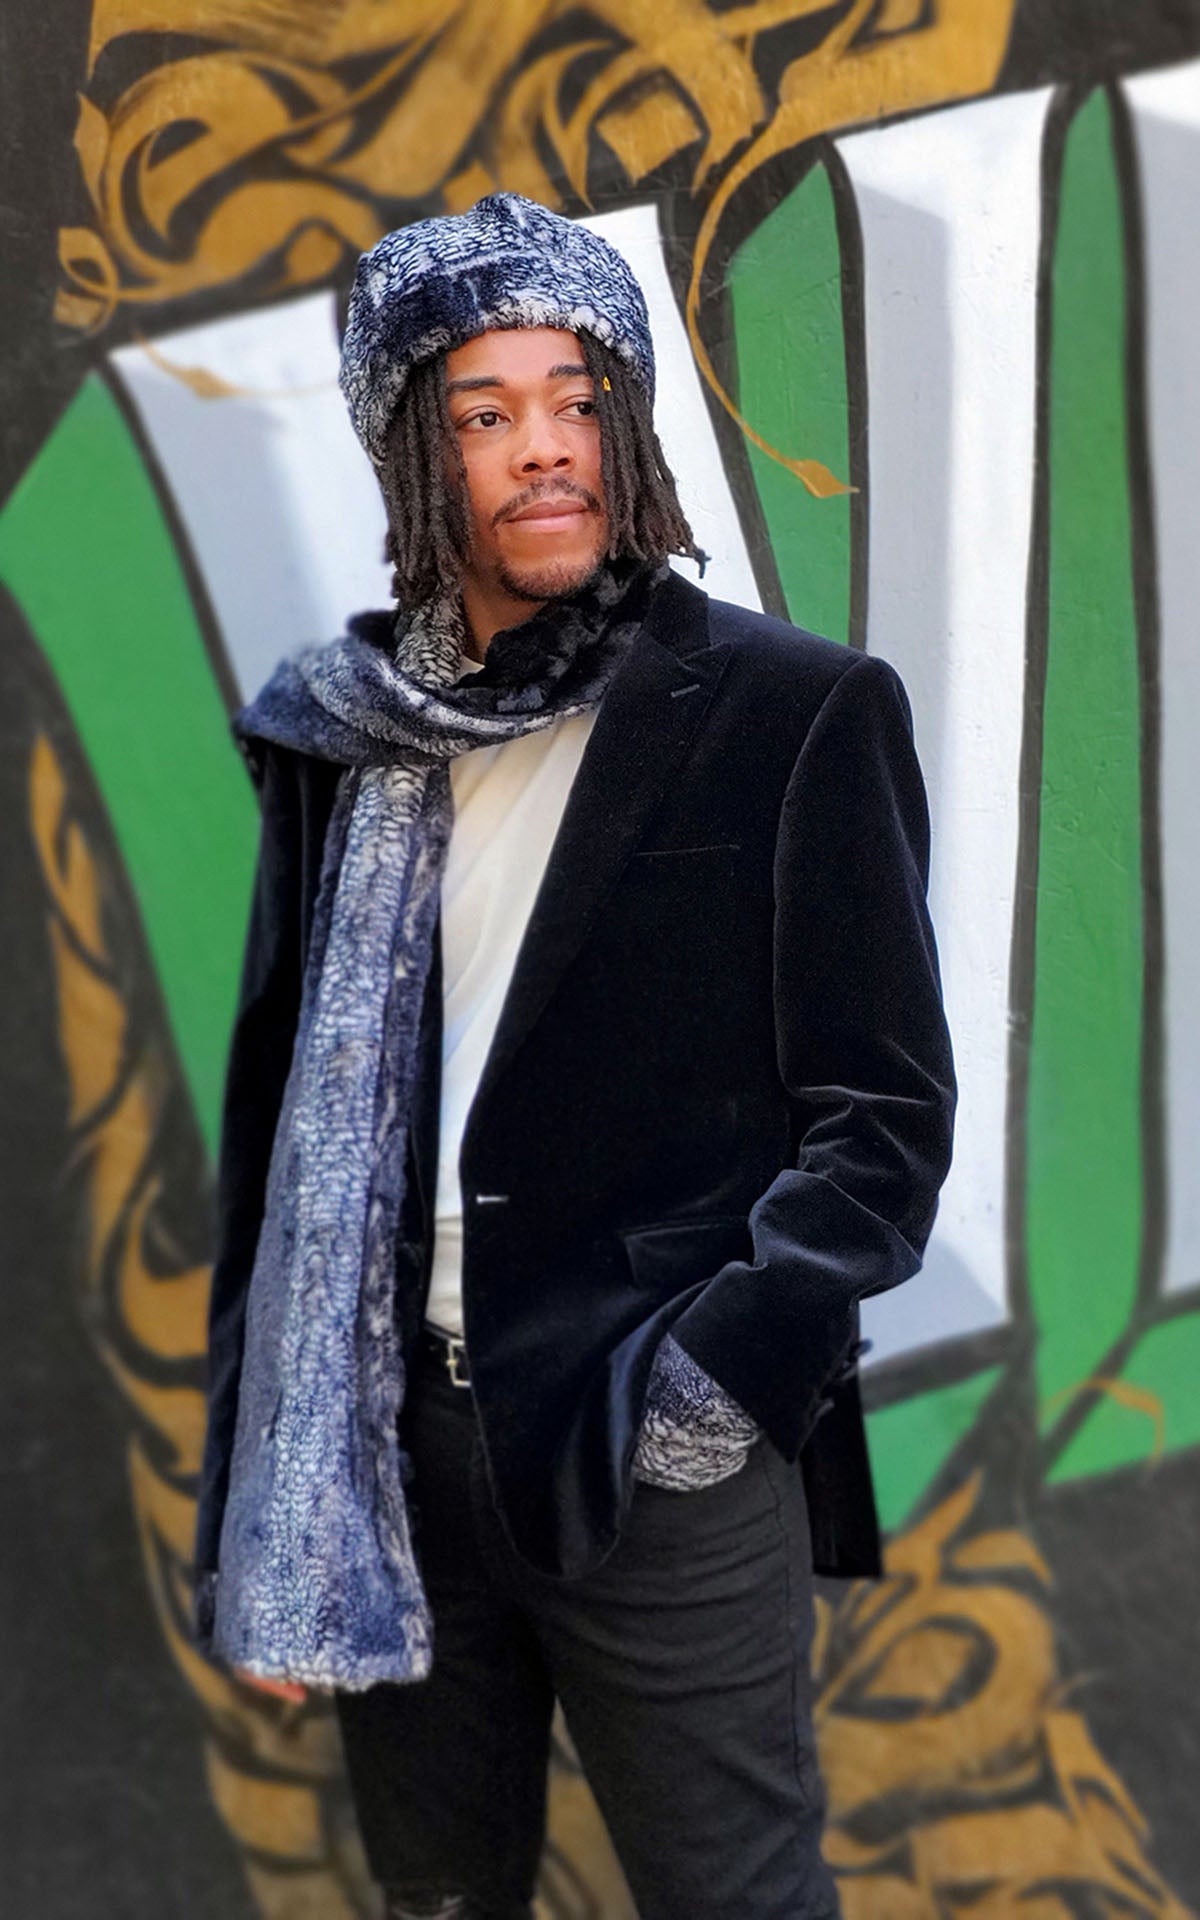 Men’s Product shot on mannequin of two-tone Classic Scarf Black Mamba animal snake print  with Cuddly Black Faux Fur | Handmade by Pandemonium Millinery Seattle, WA USA